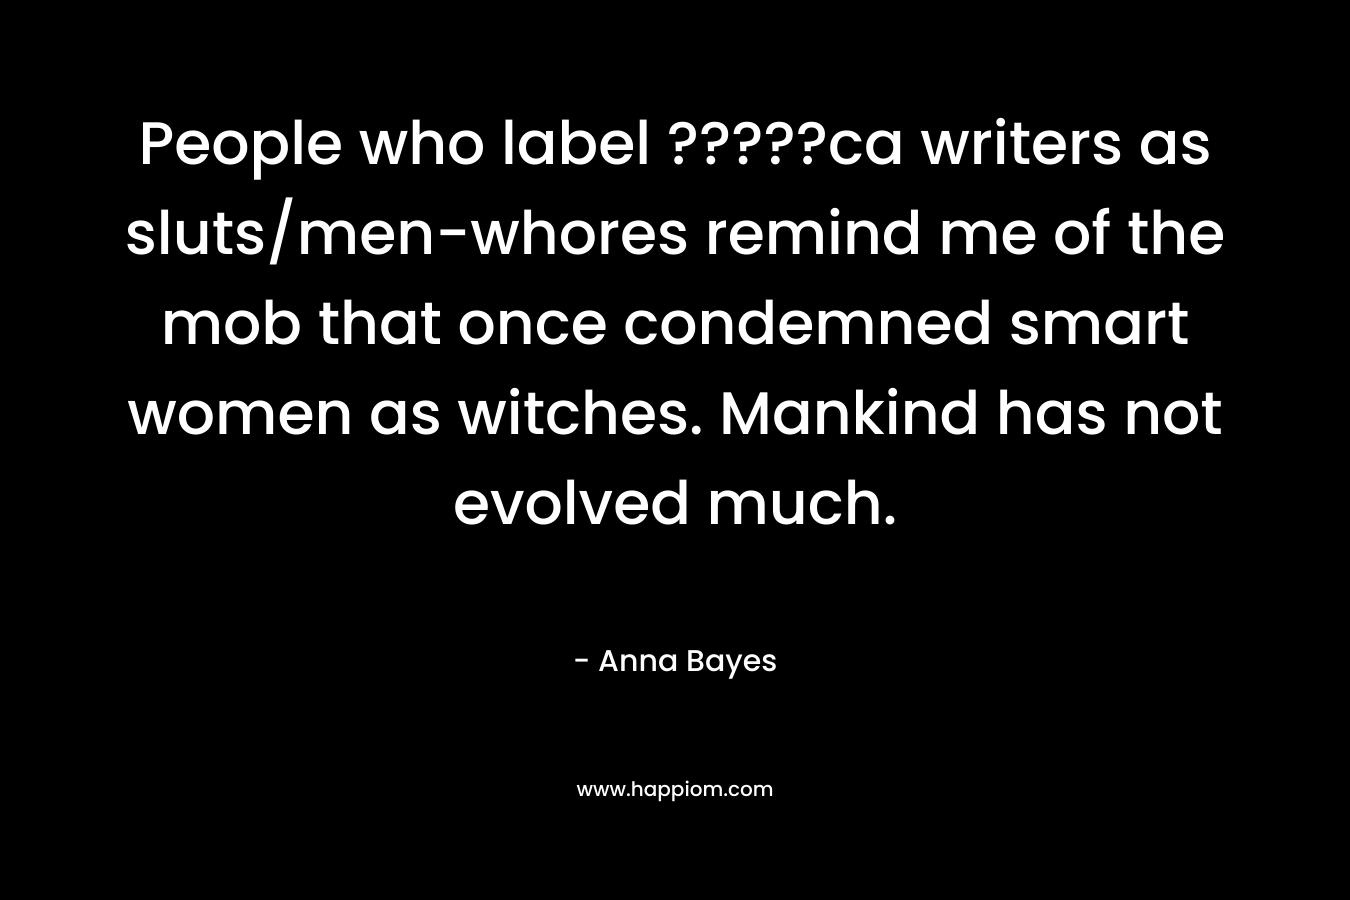 People who label ?????ca writers as sluts/men-whores remind me of the mob that once condemned smart women as witches. Mankind has not evolved much.